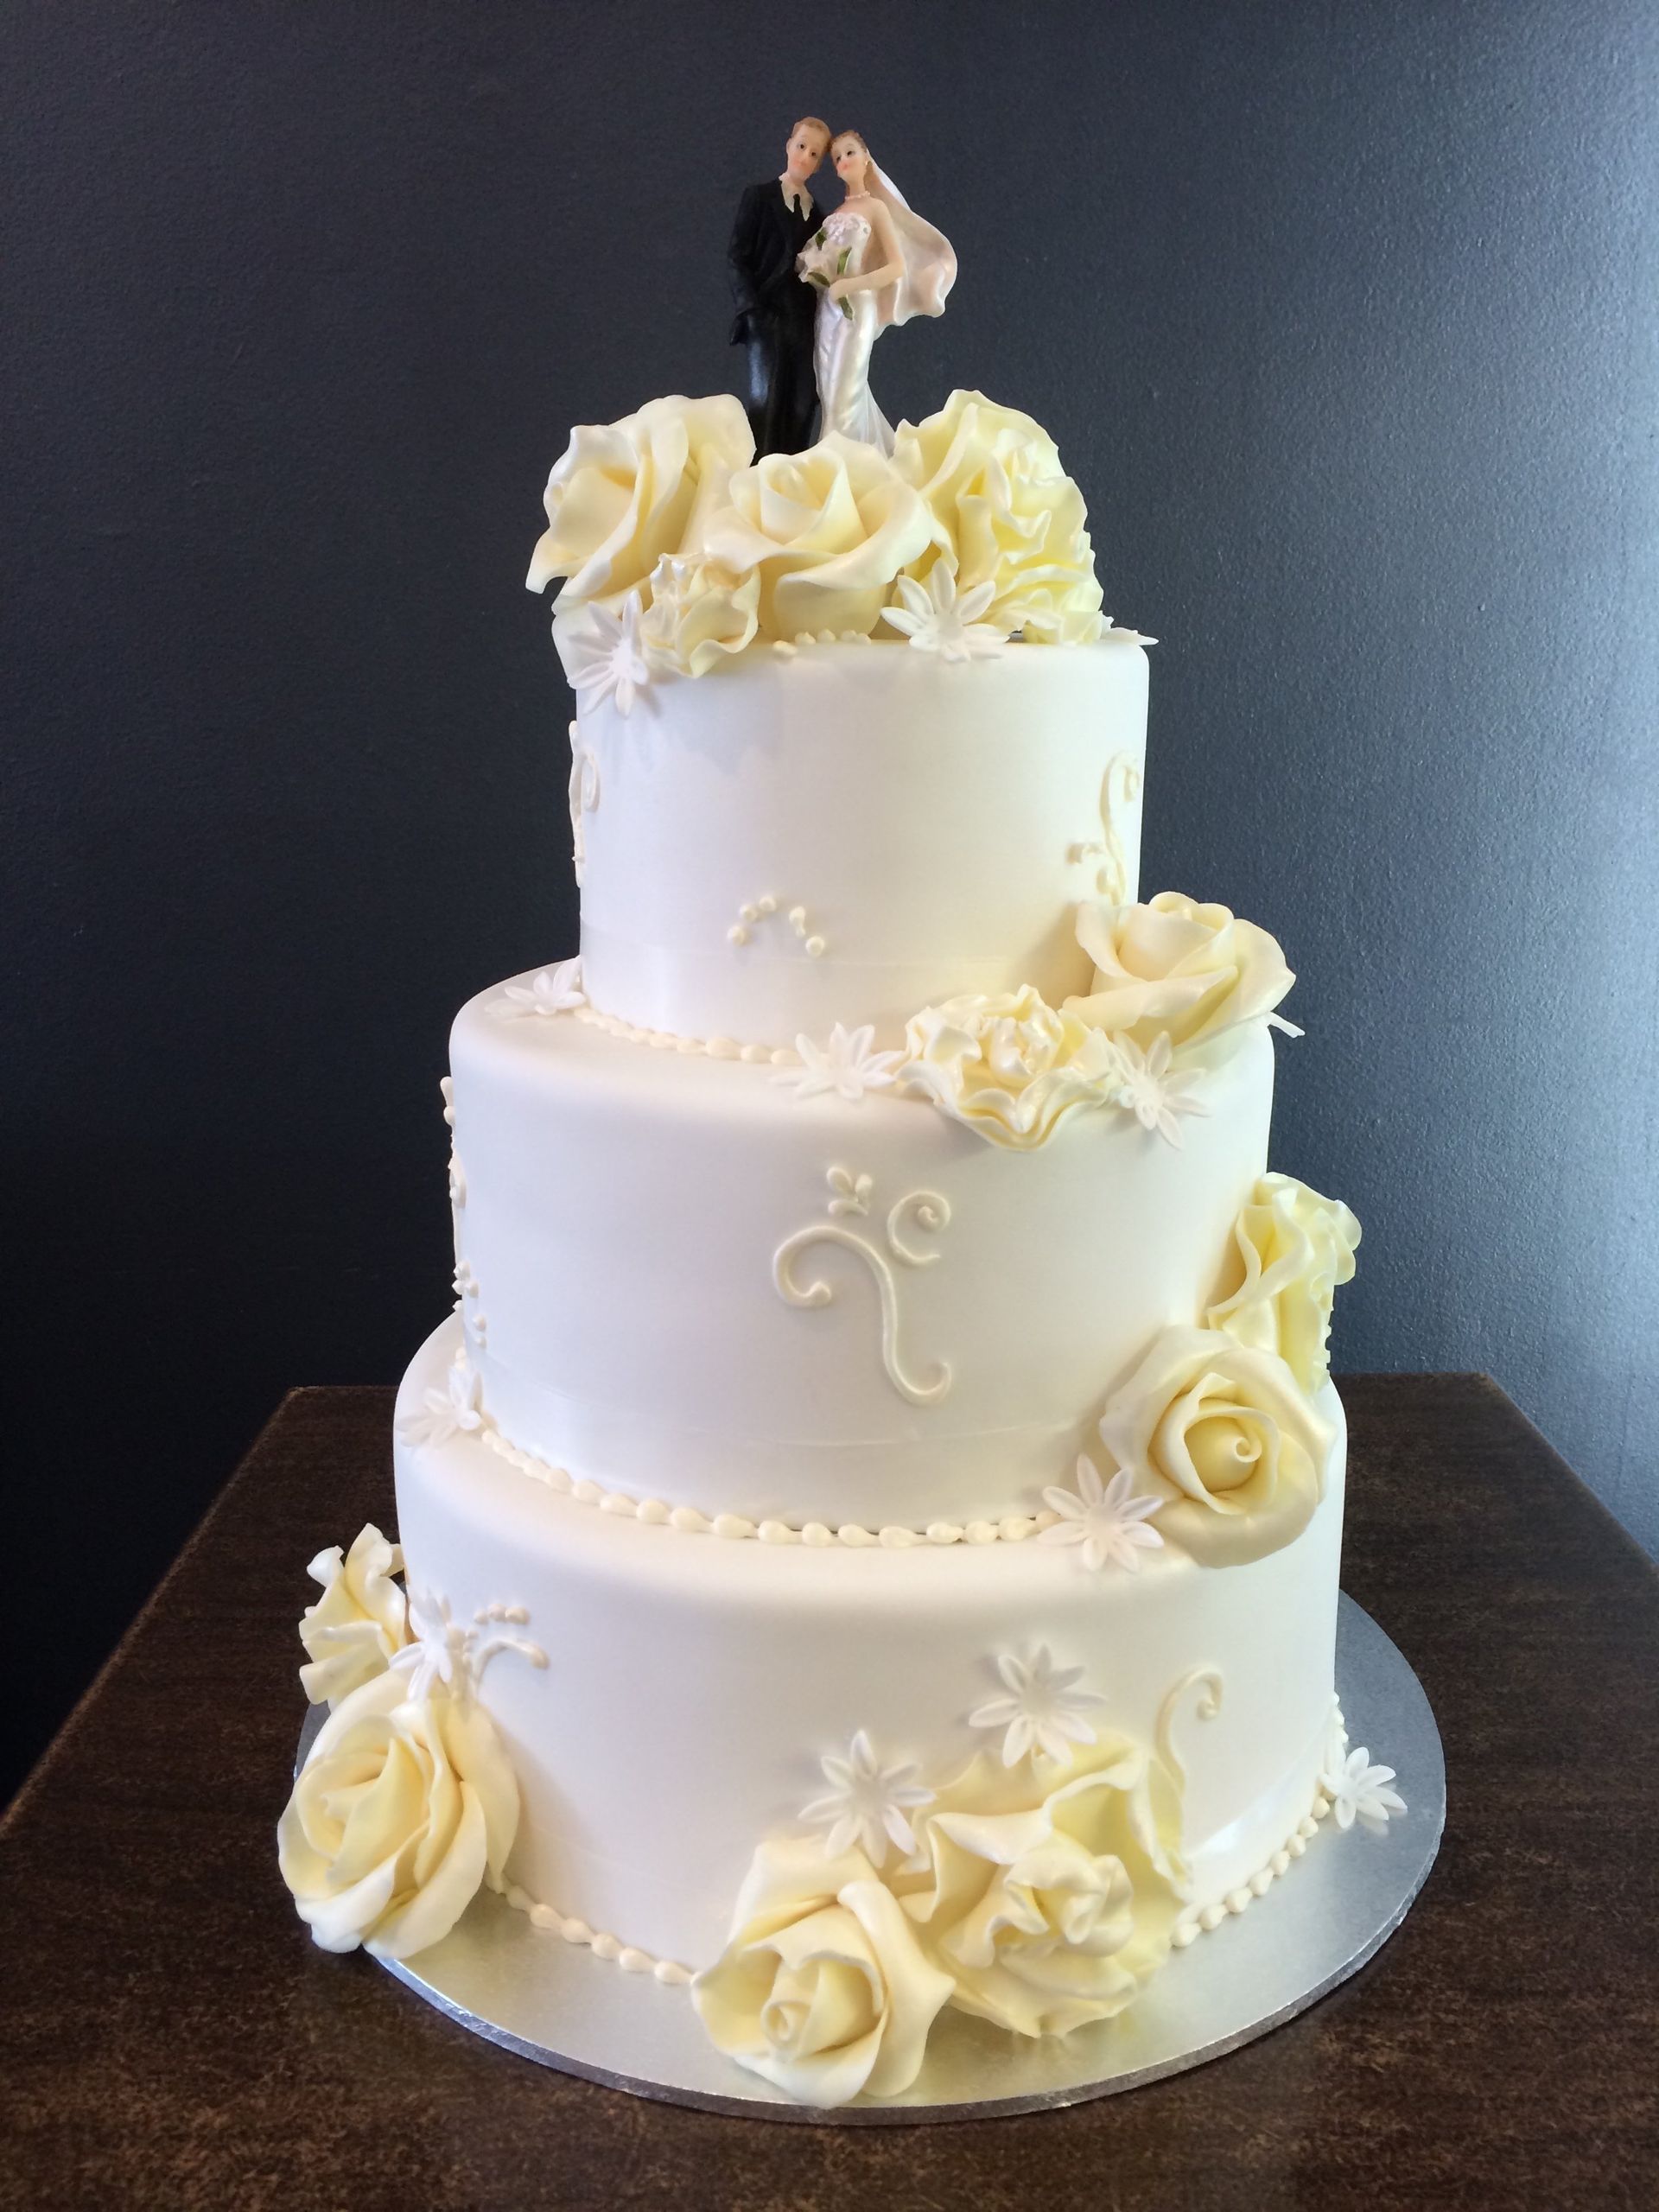 white triple layer cake with rose accents and bride and groom on top